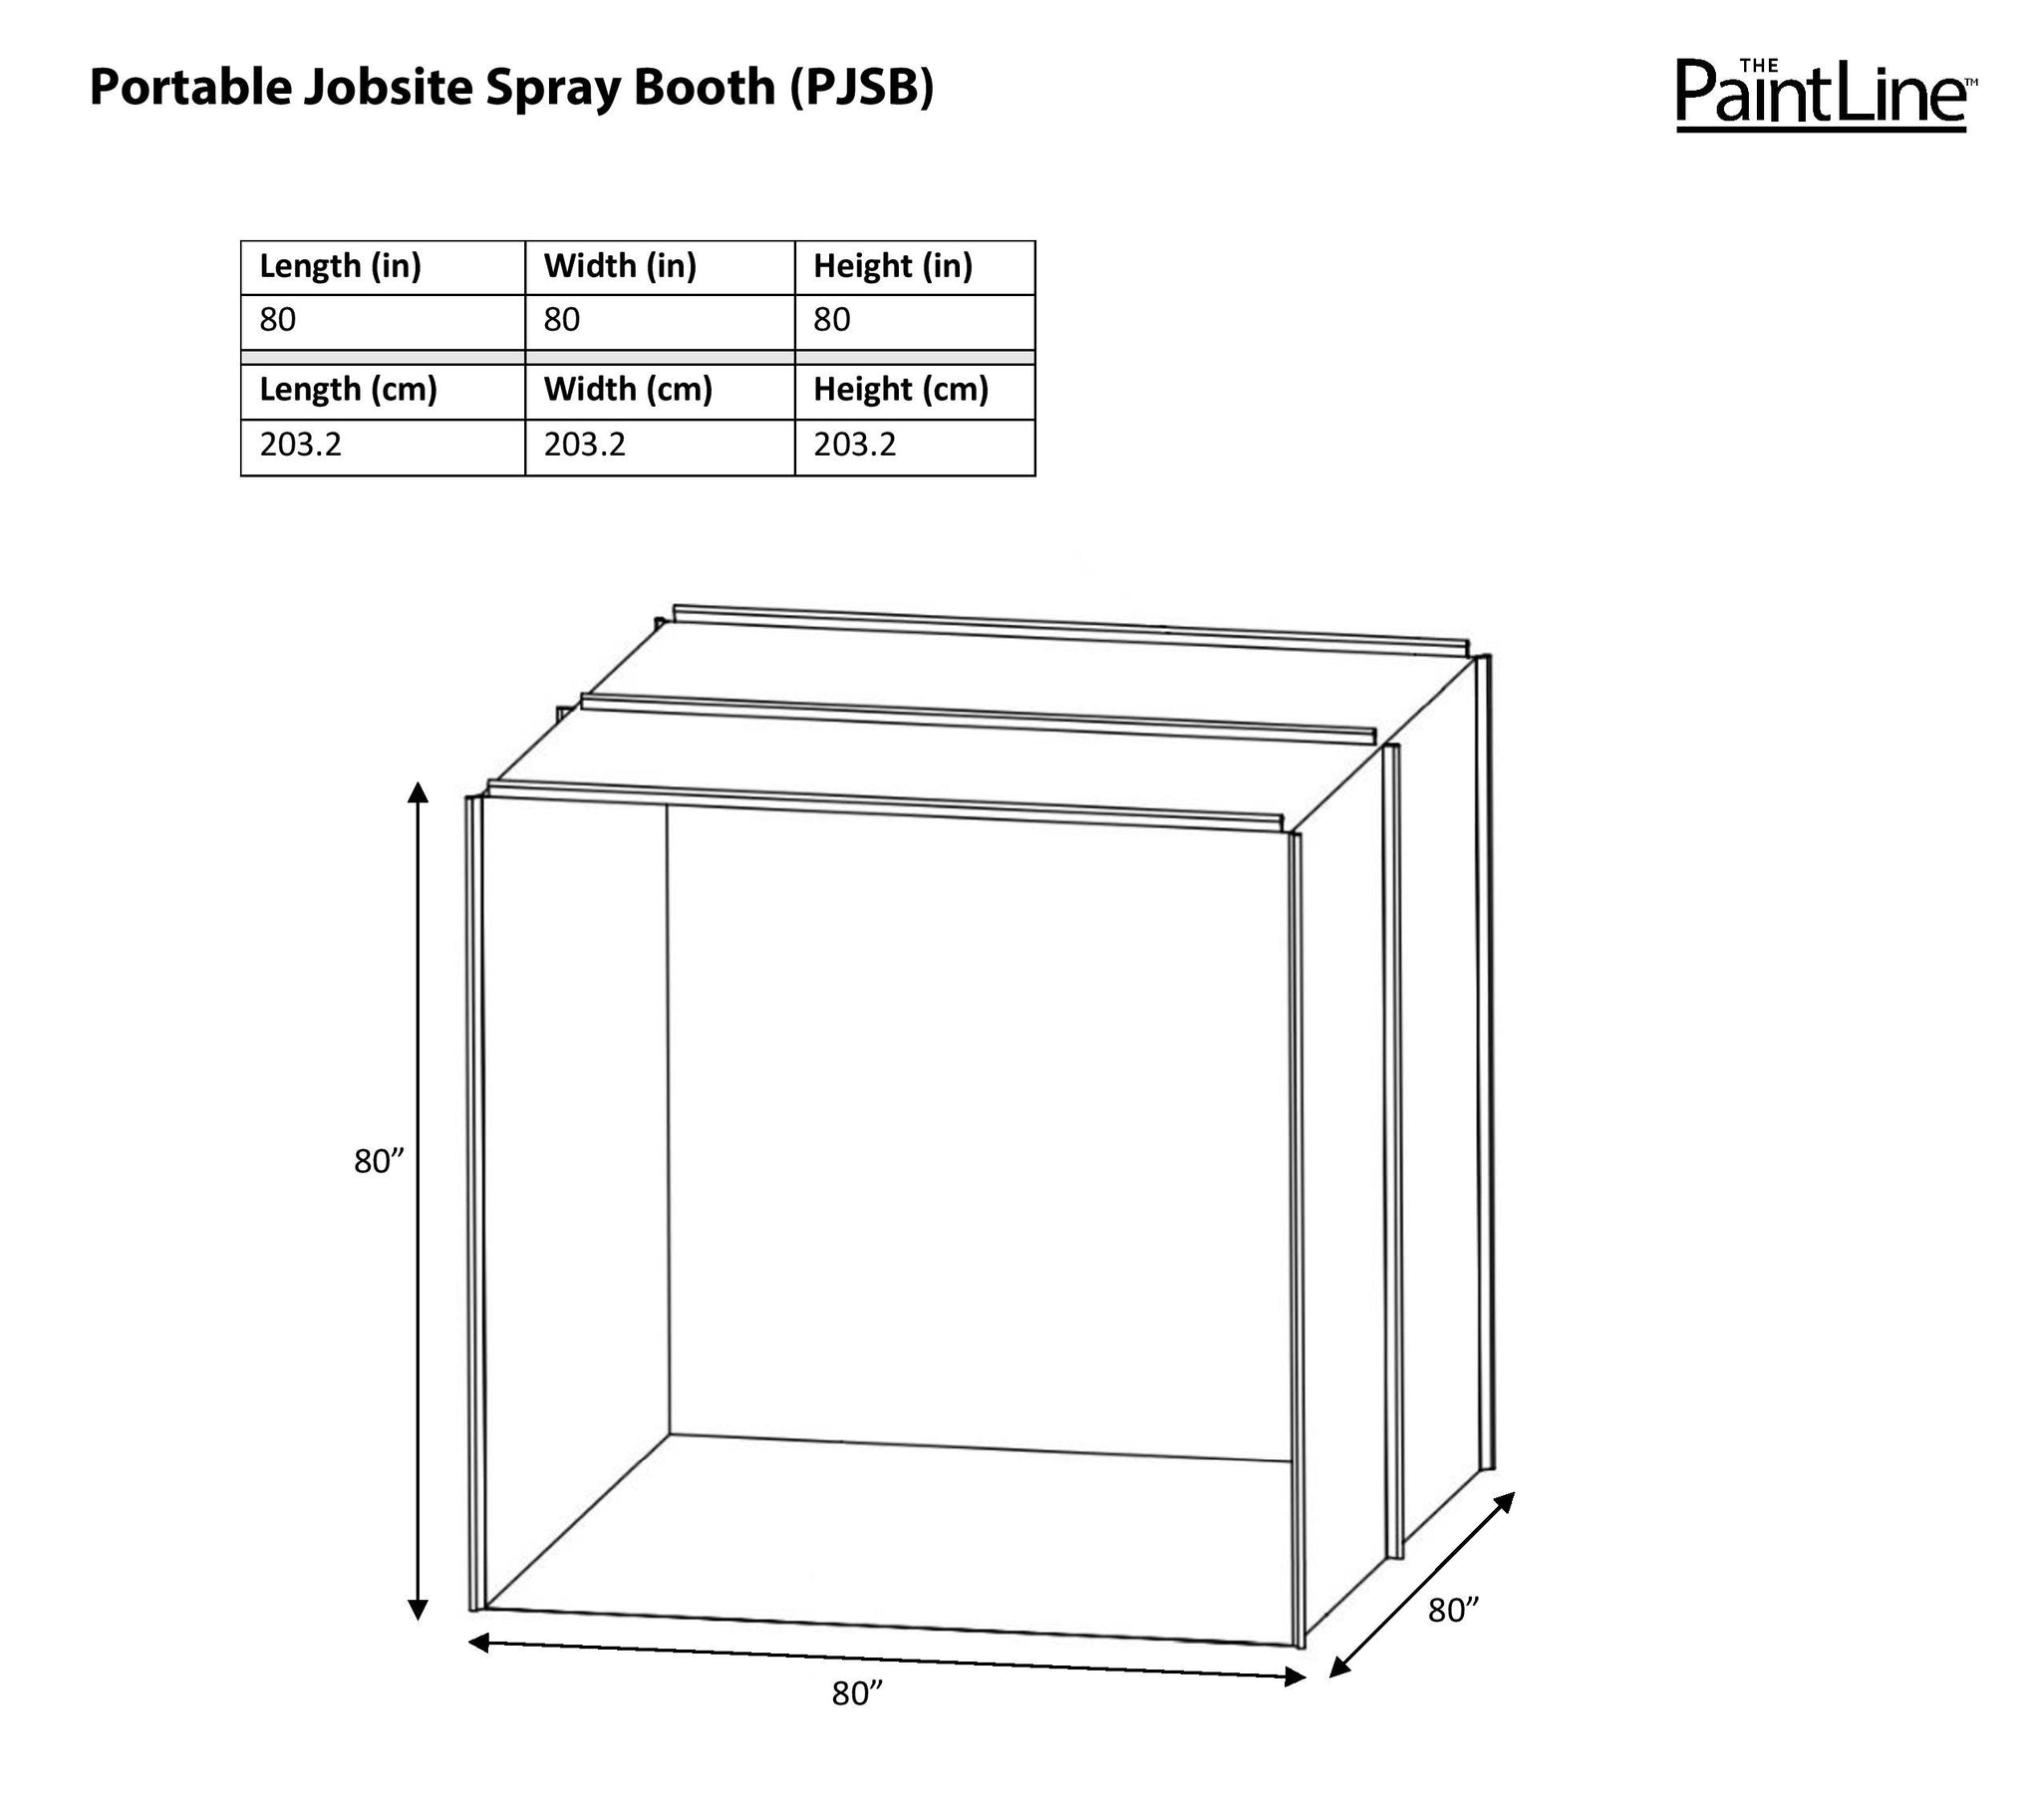 PaintLine Releases Portable Jobsite Spray Booth Aimed at Reducing Time,  Cost